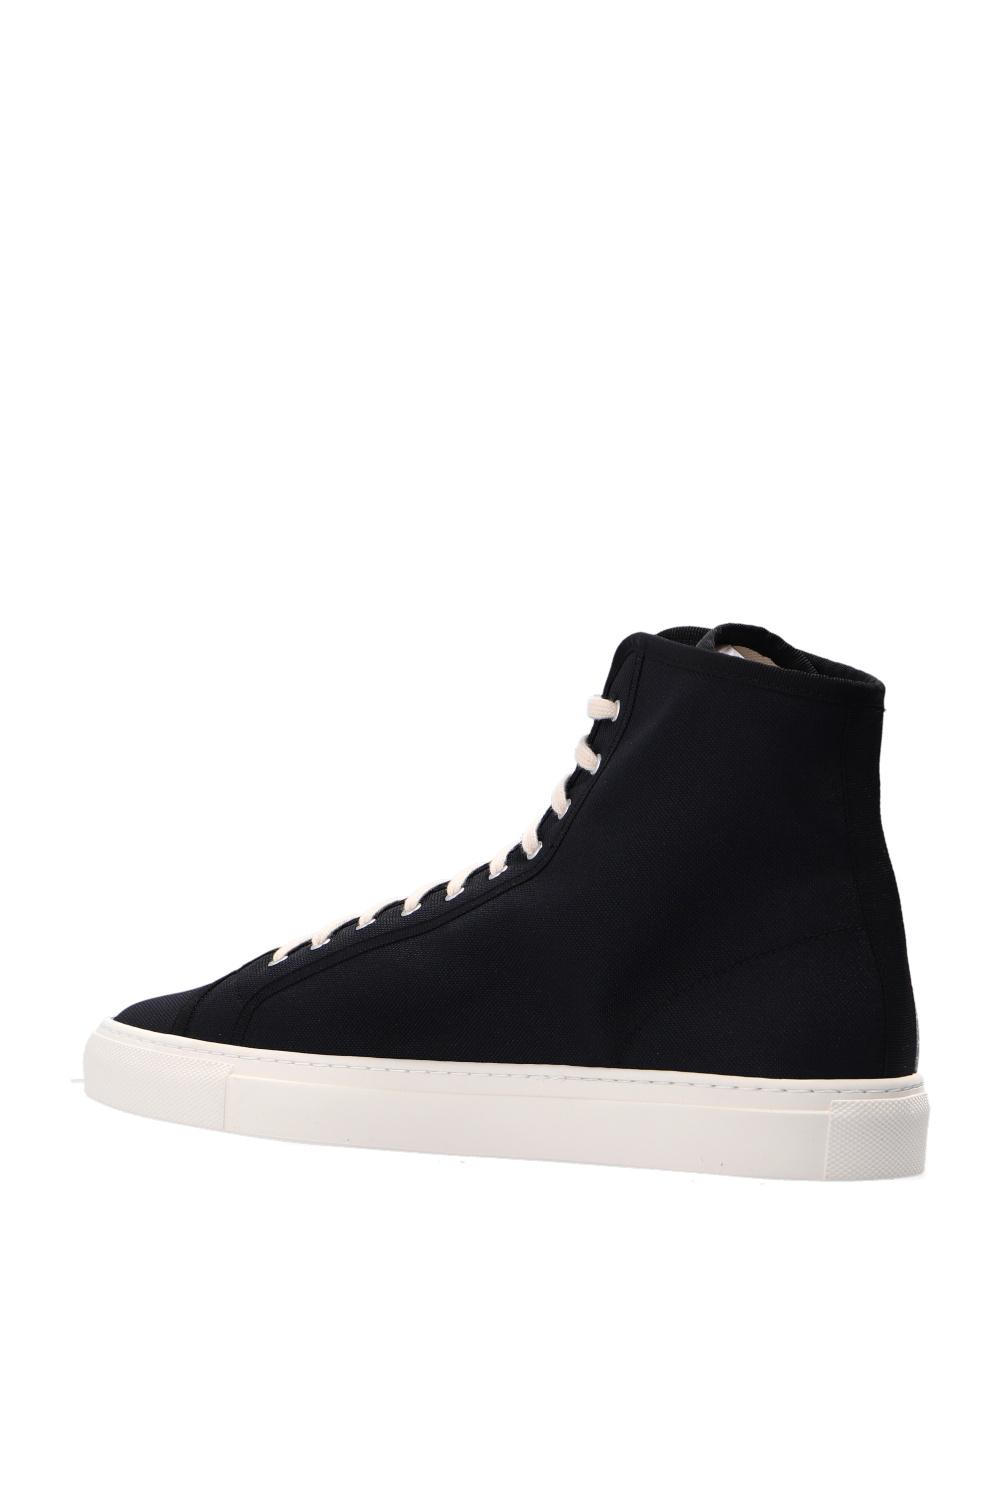 Common Projects 'tournament High' Sneakers in Black for Men | Lyst